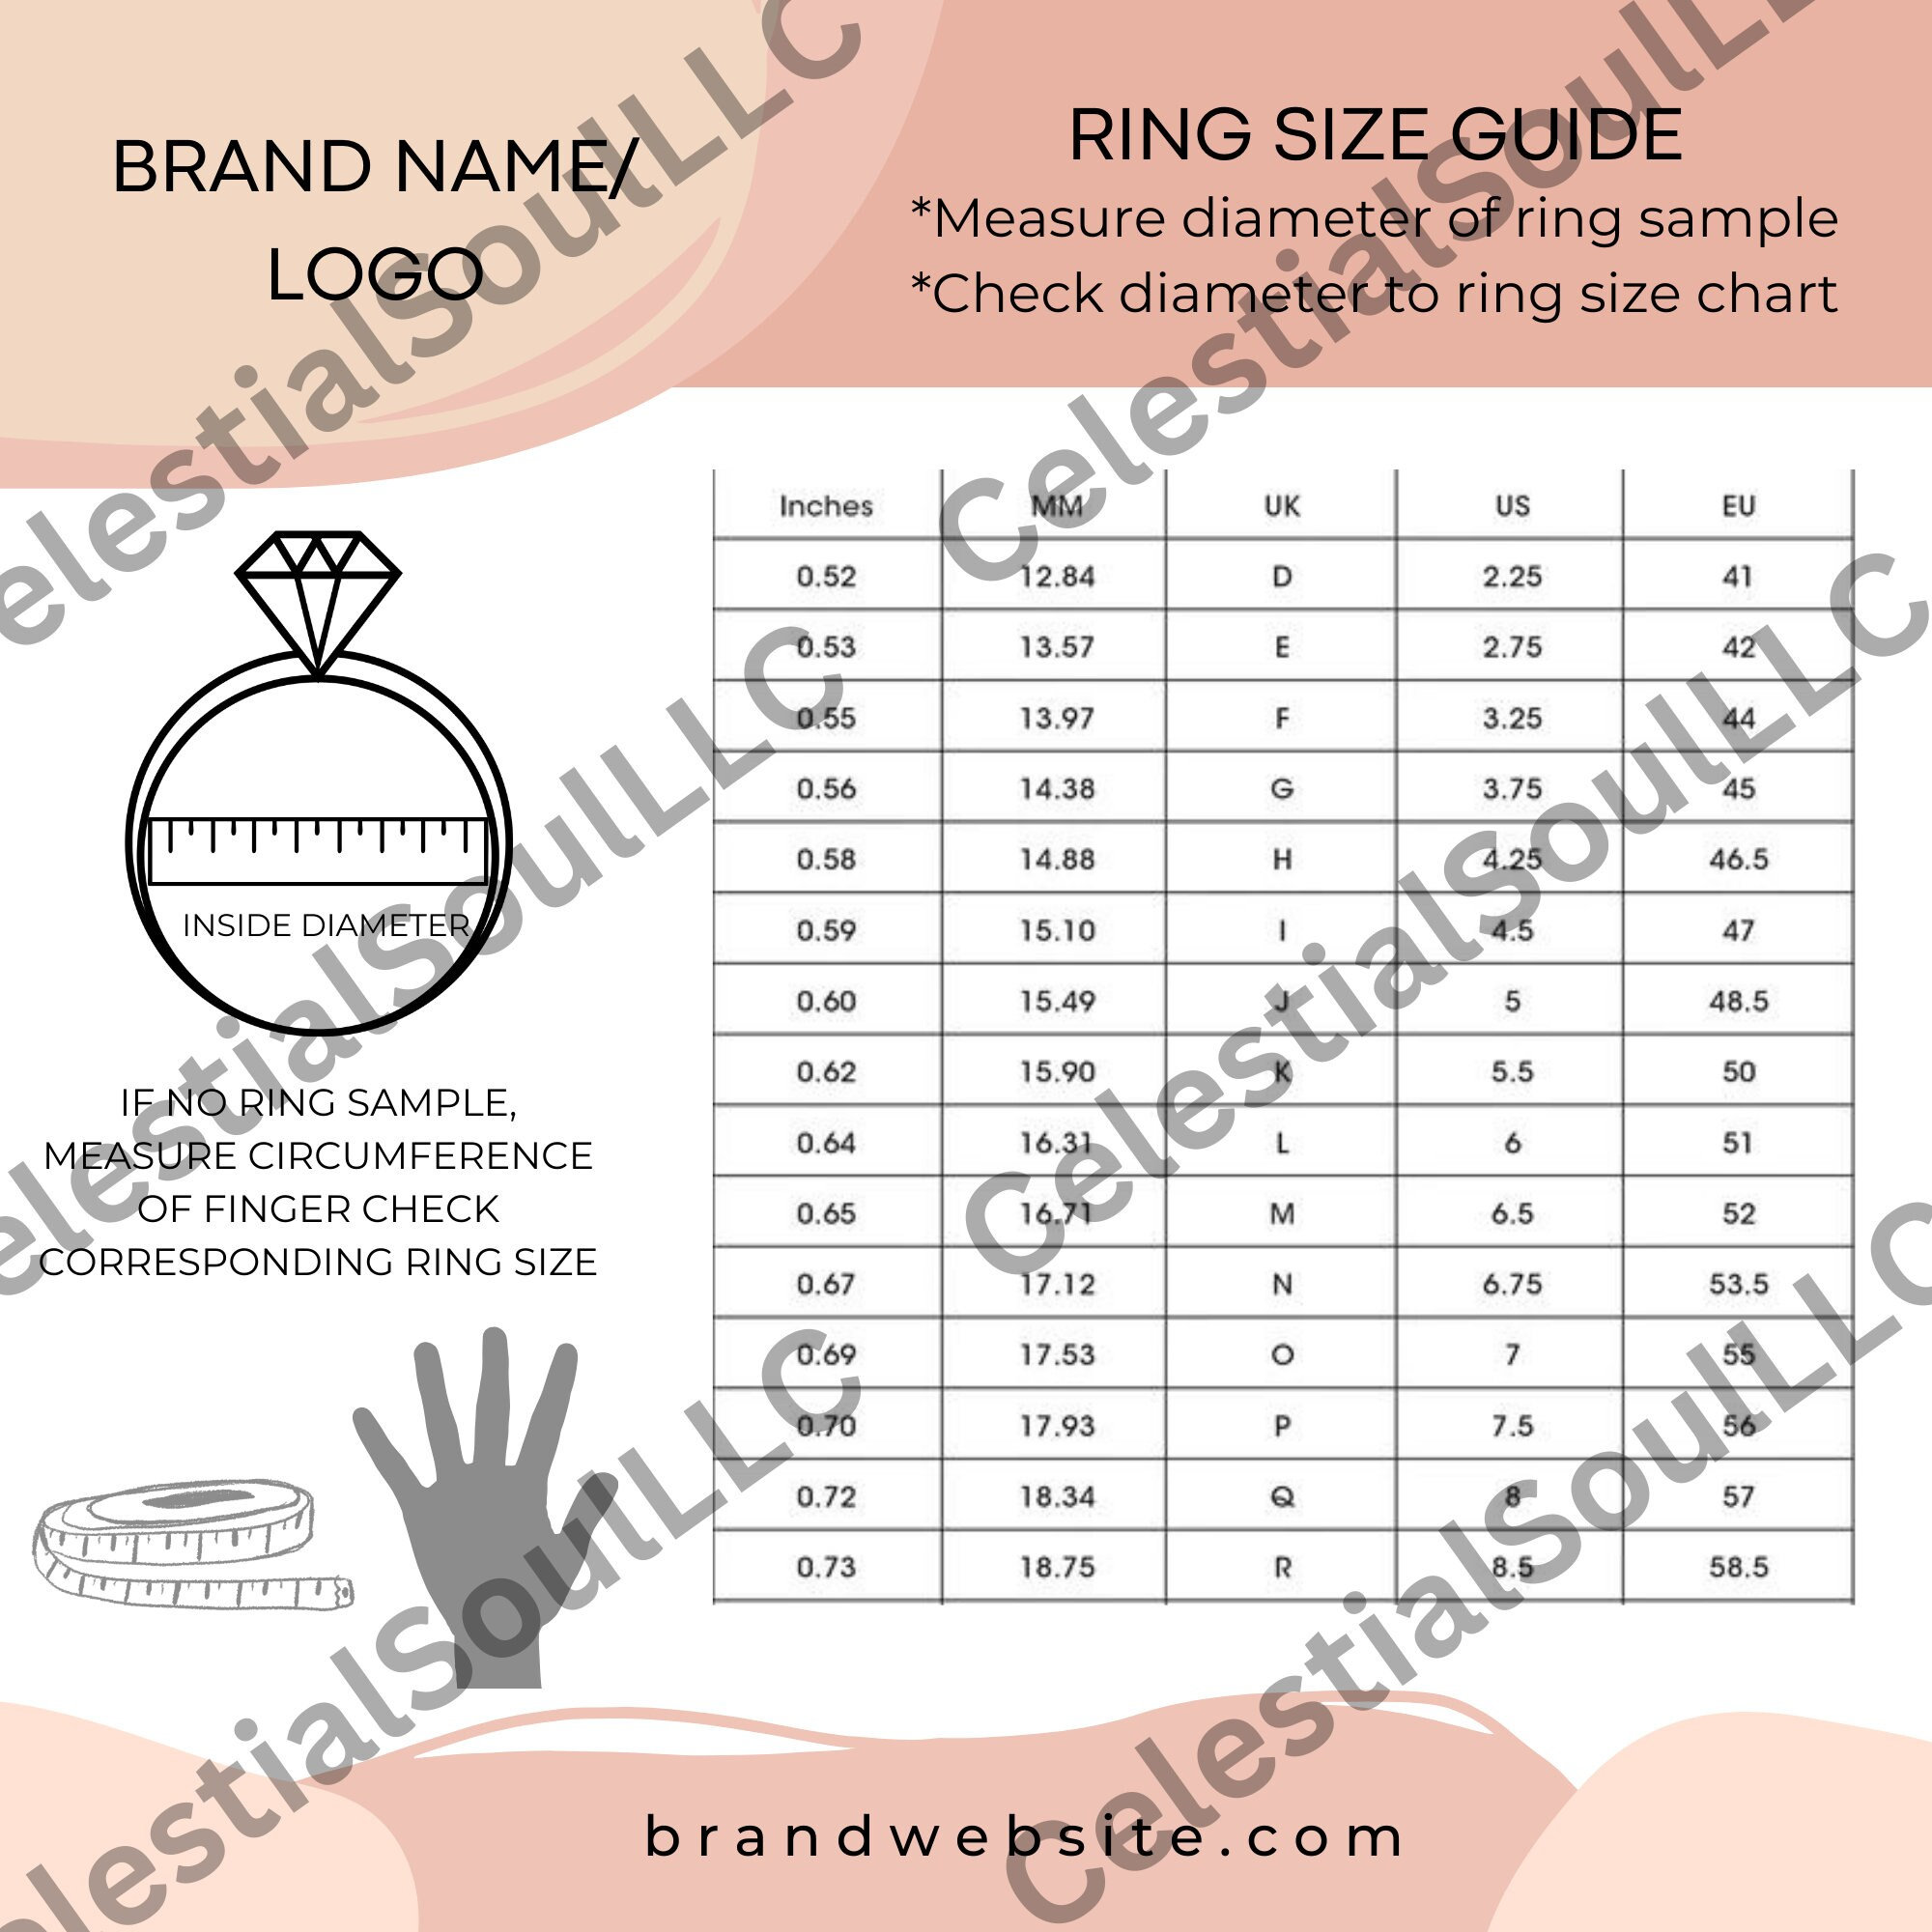 RING SIZER Easy at Home Size Kit With Free US Shipping, Ships